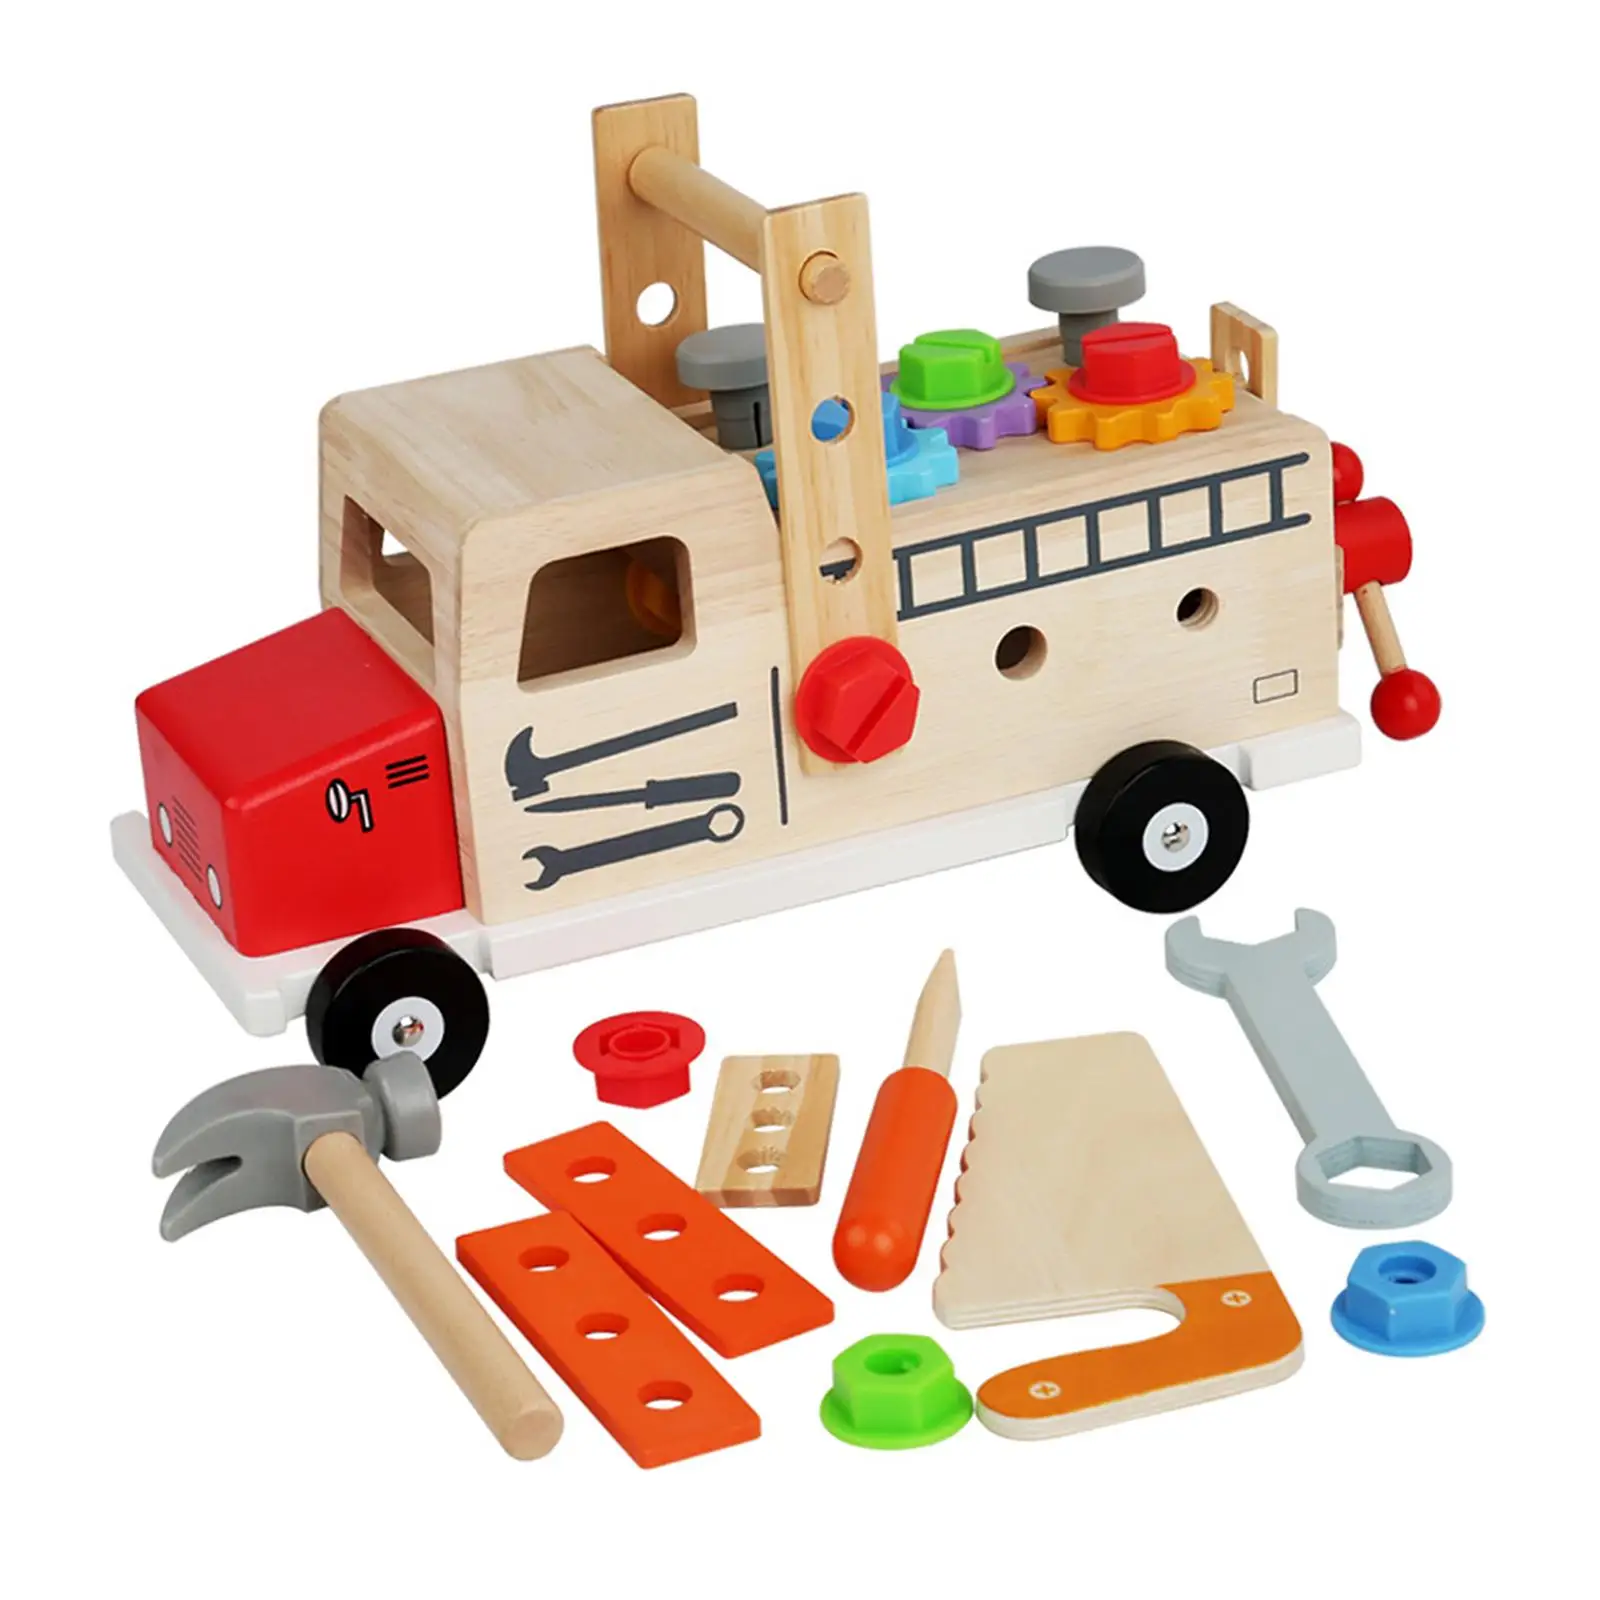 Construction Toy Stem Creative Montessori Role Play Wood Kids Tool Set for Children 3 4 5 6 Years Old Boys Girls Xmas Present